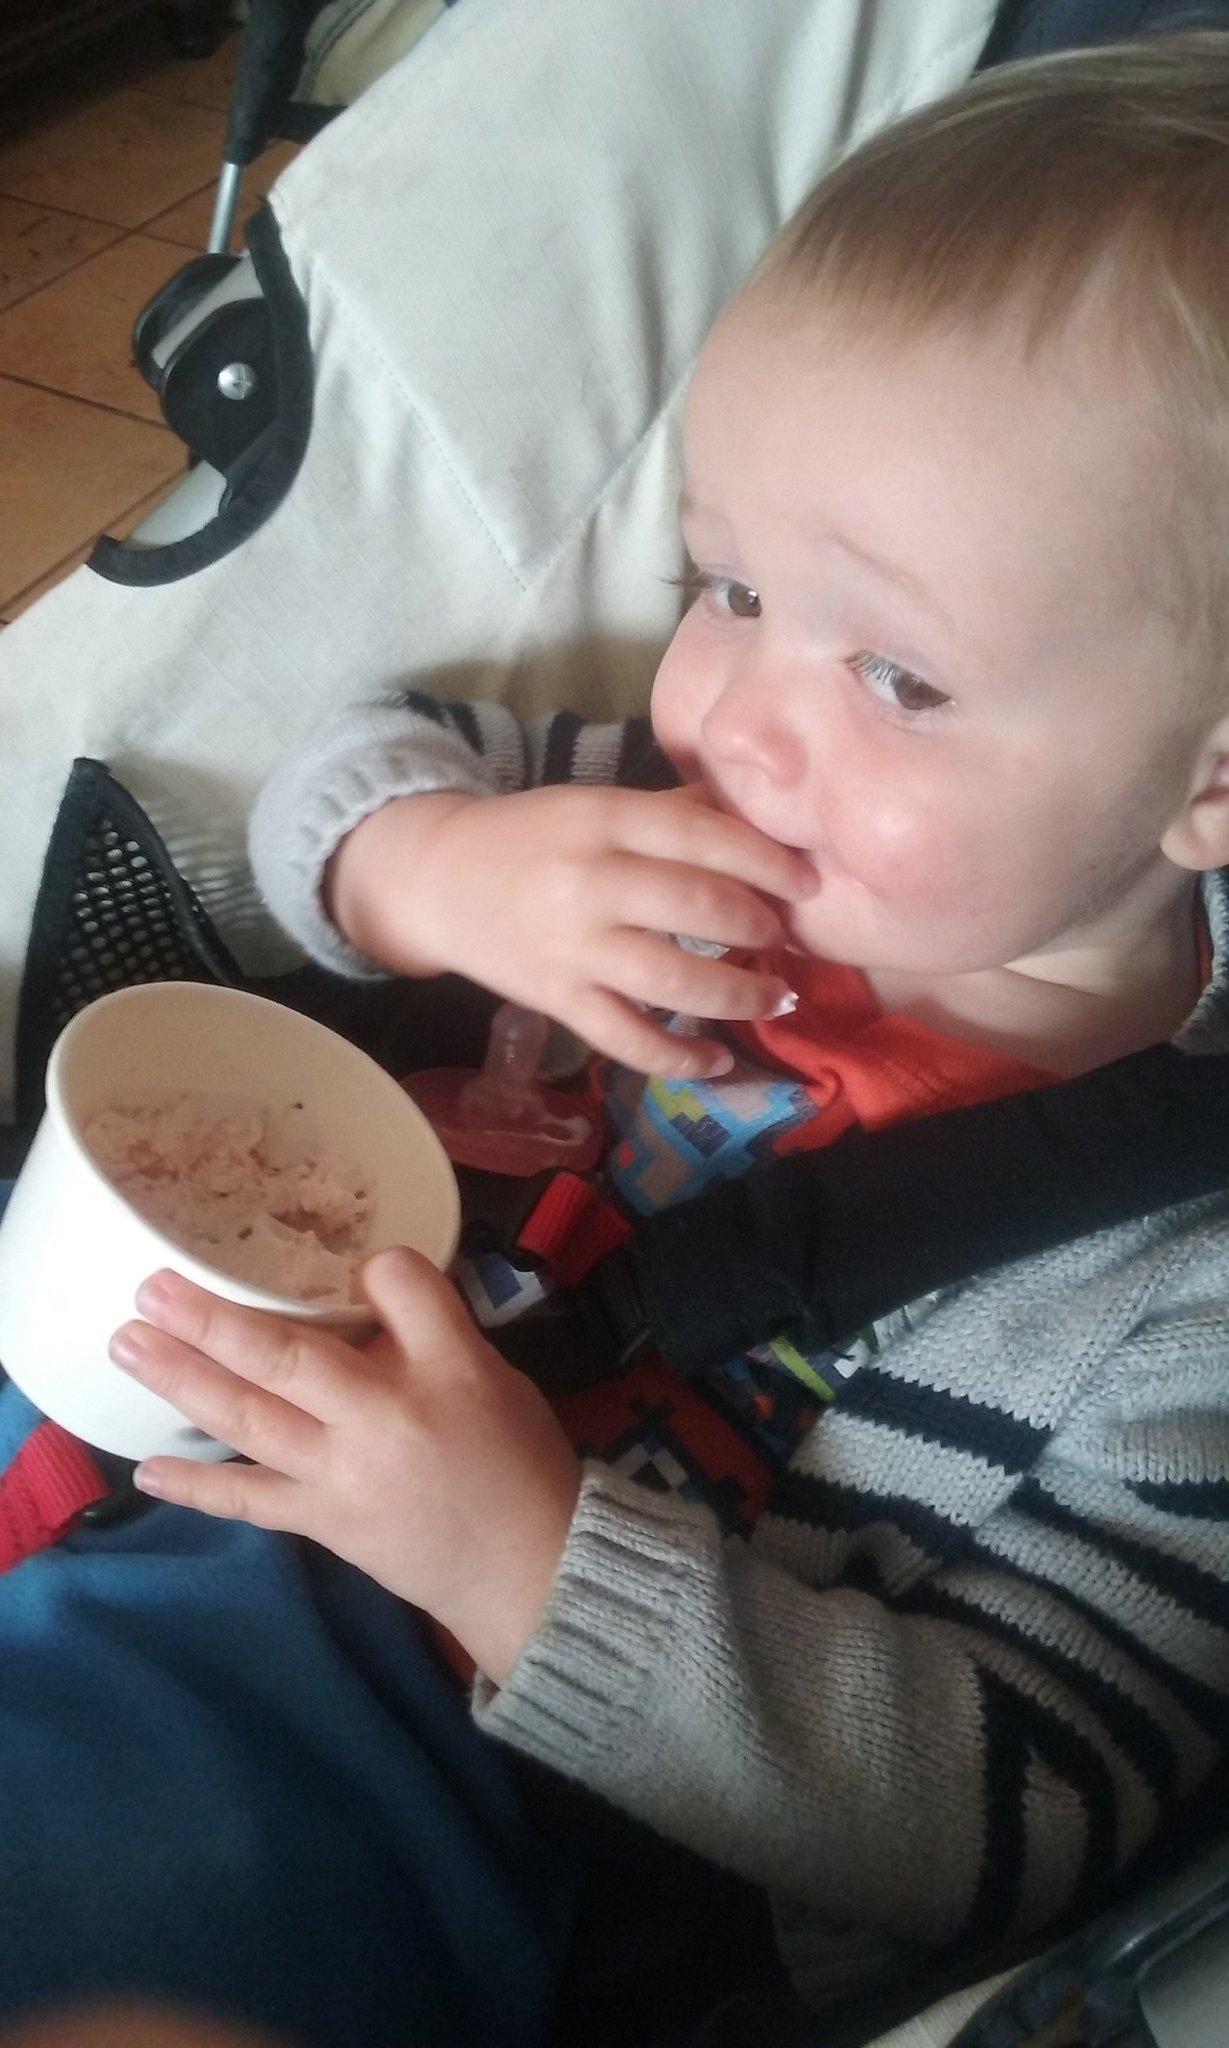 Julian, strapped into a stroller, holds a paper bowl of ice cream in his left hand while sucking the fingers on his right hand.